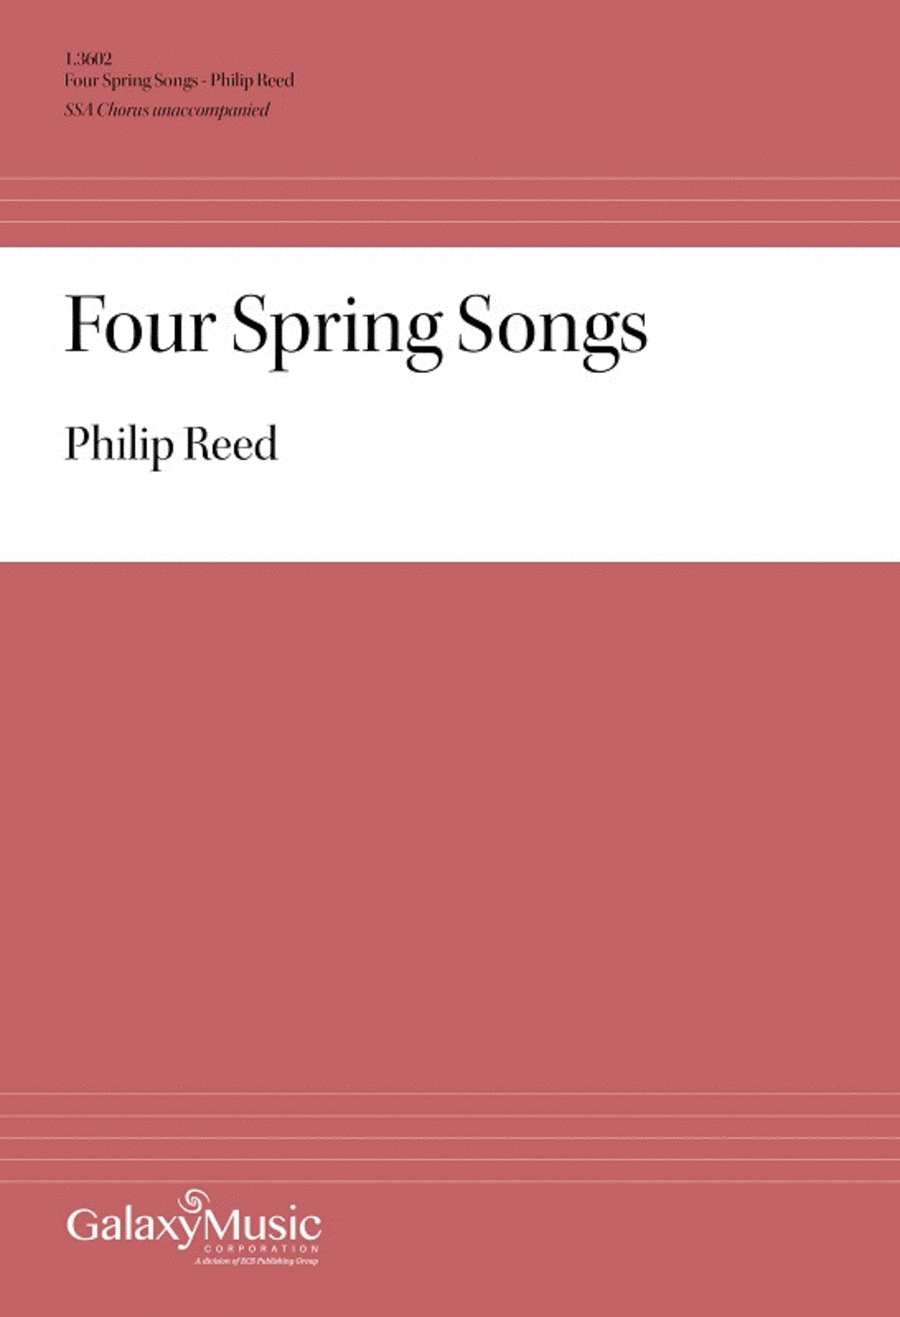 Four Spring Songs